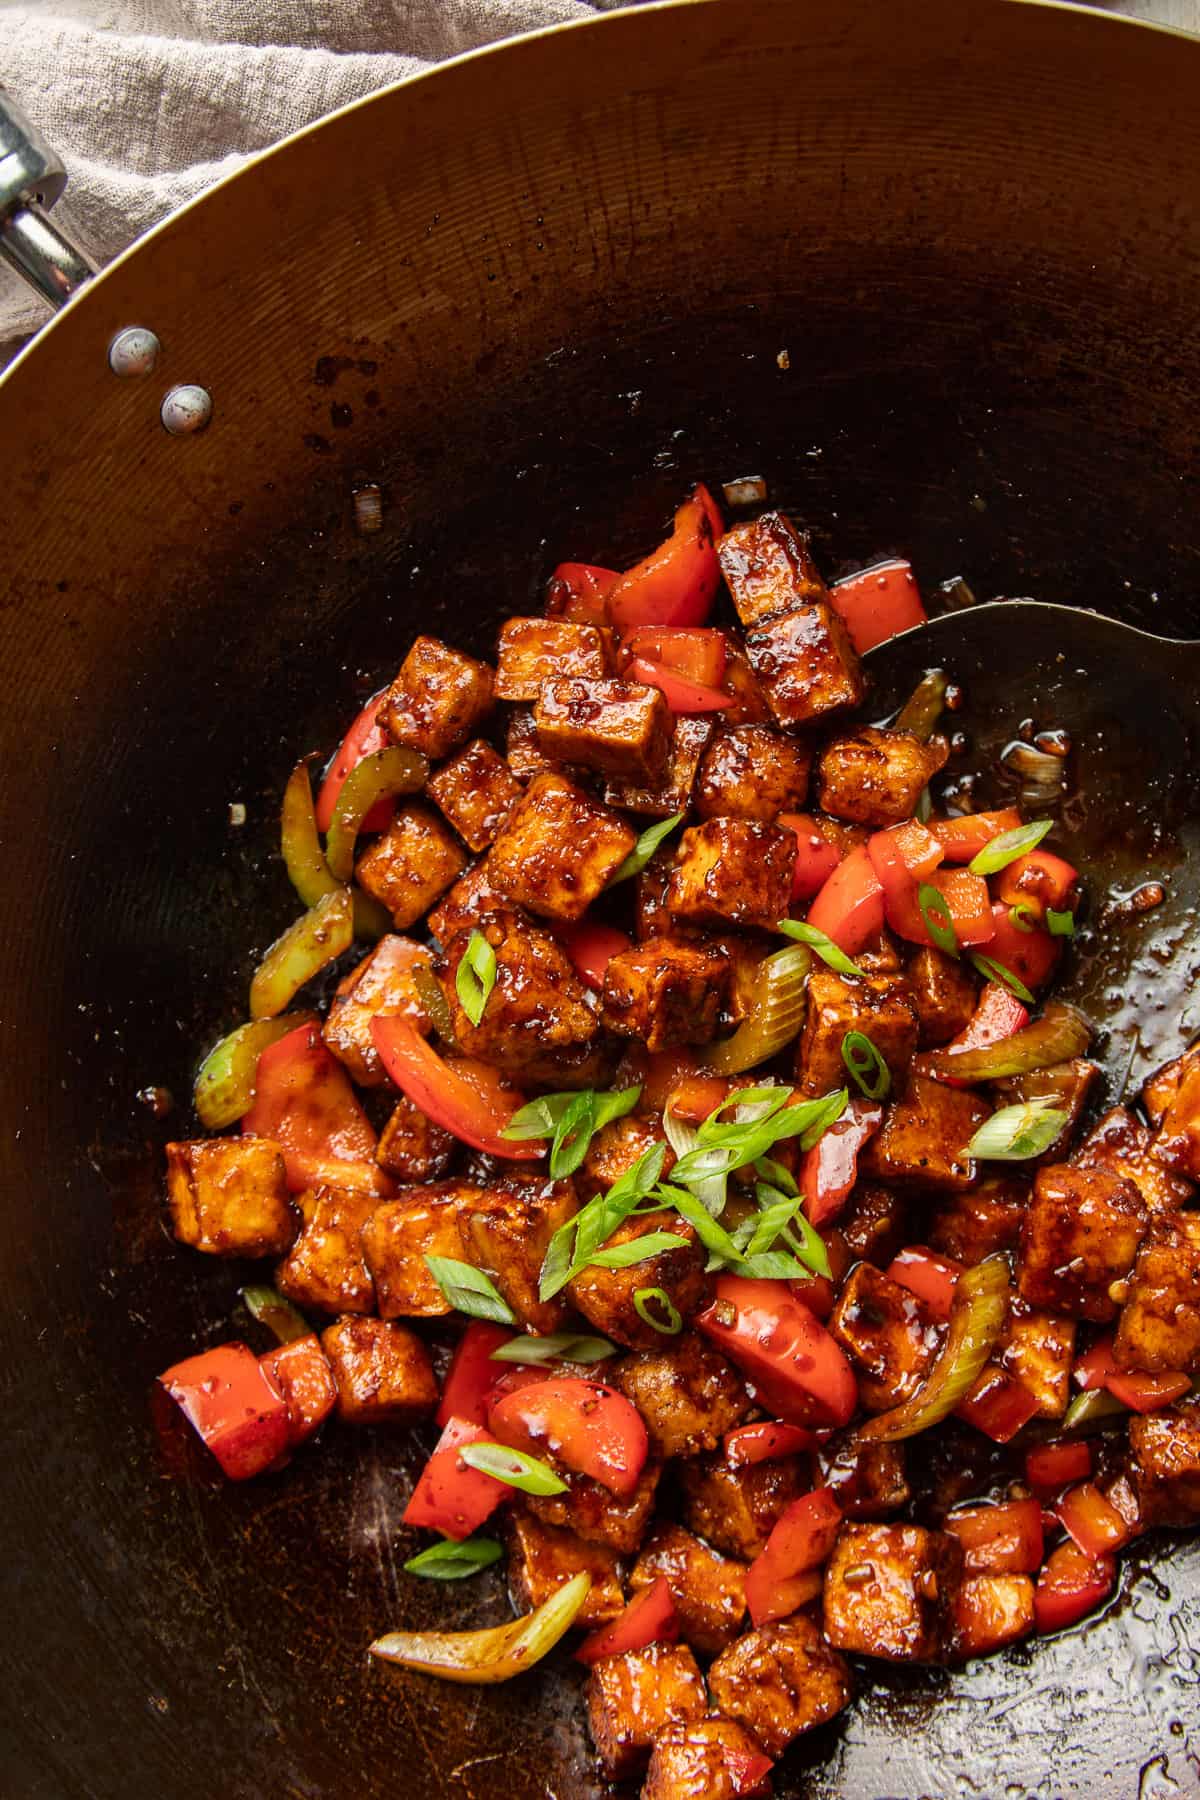 Black Pepper Tofu and vegetables in a wok.